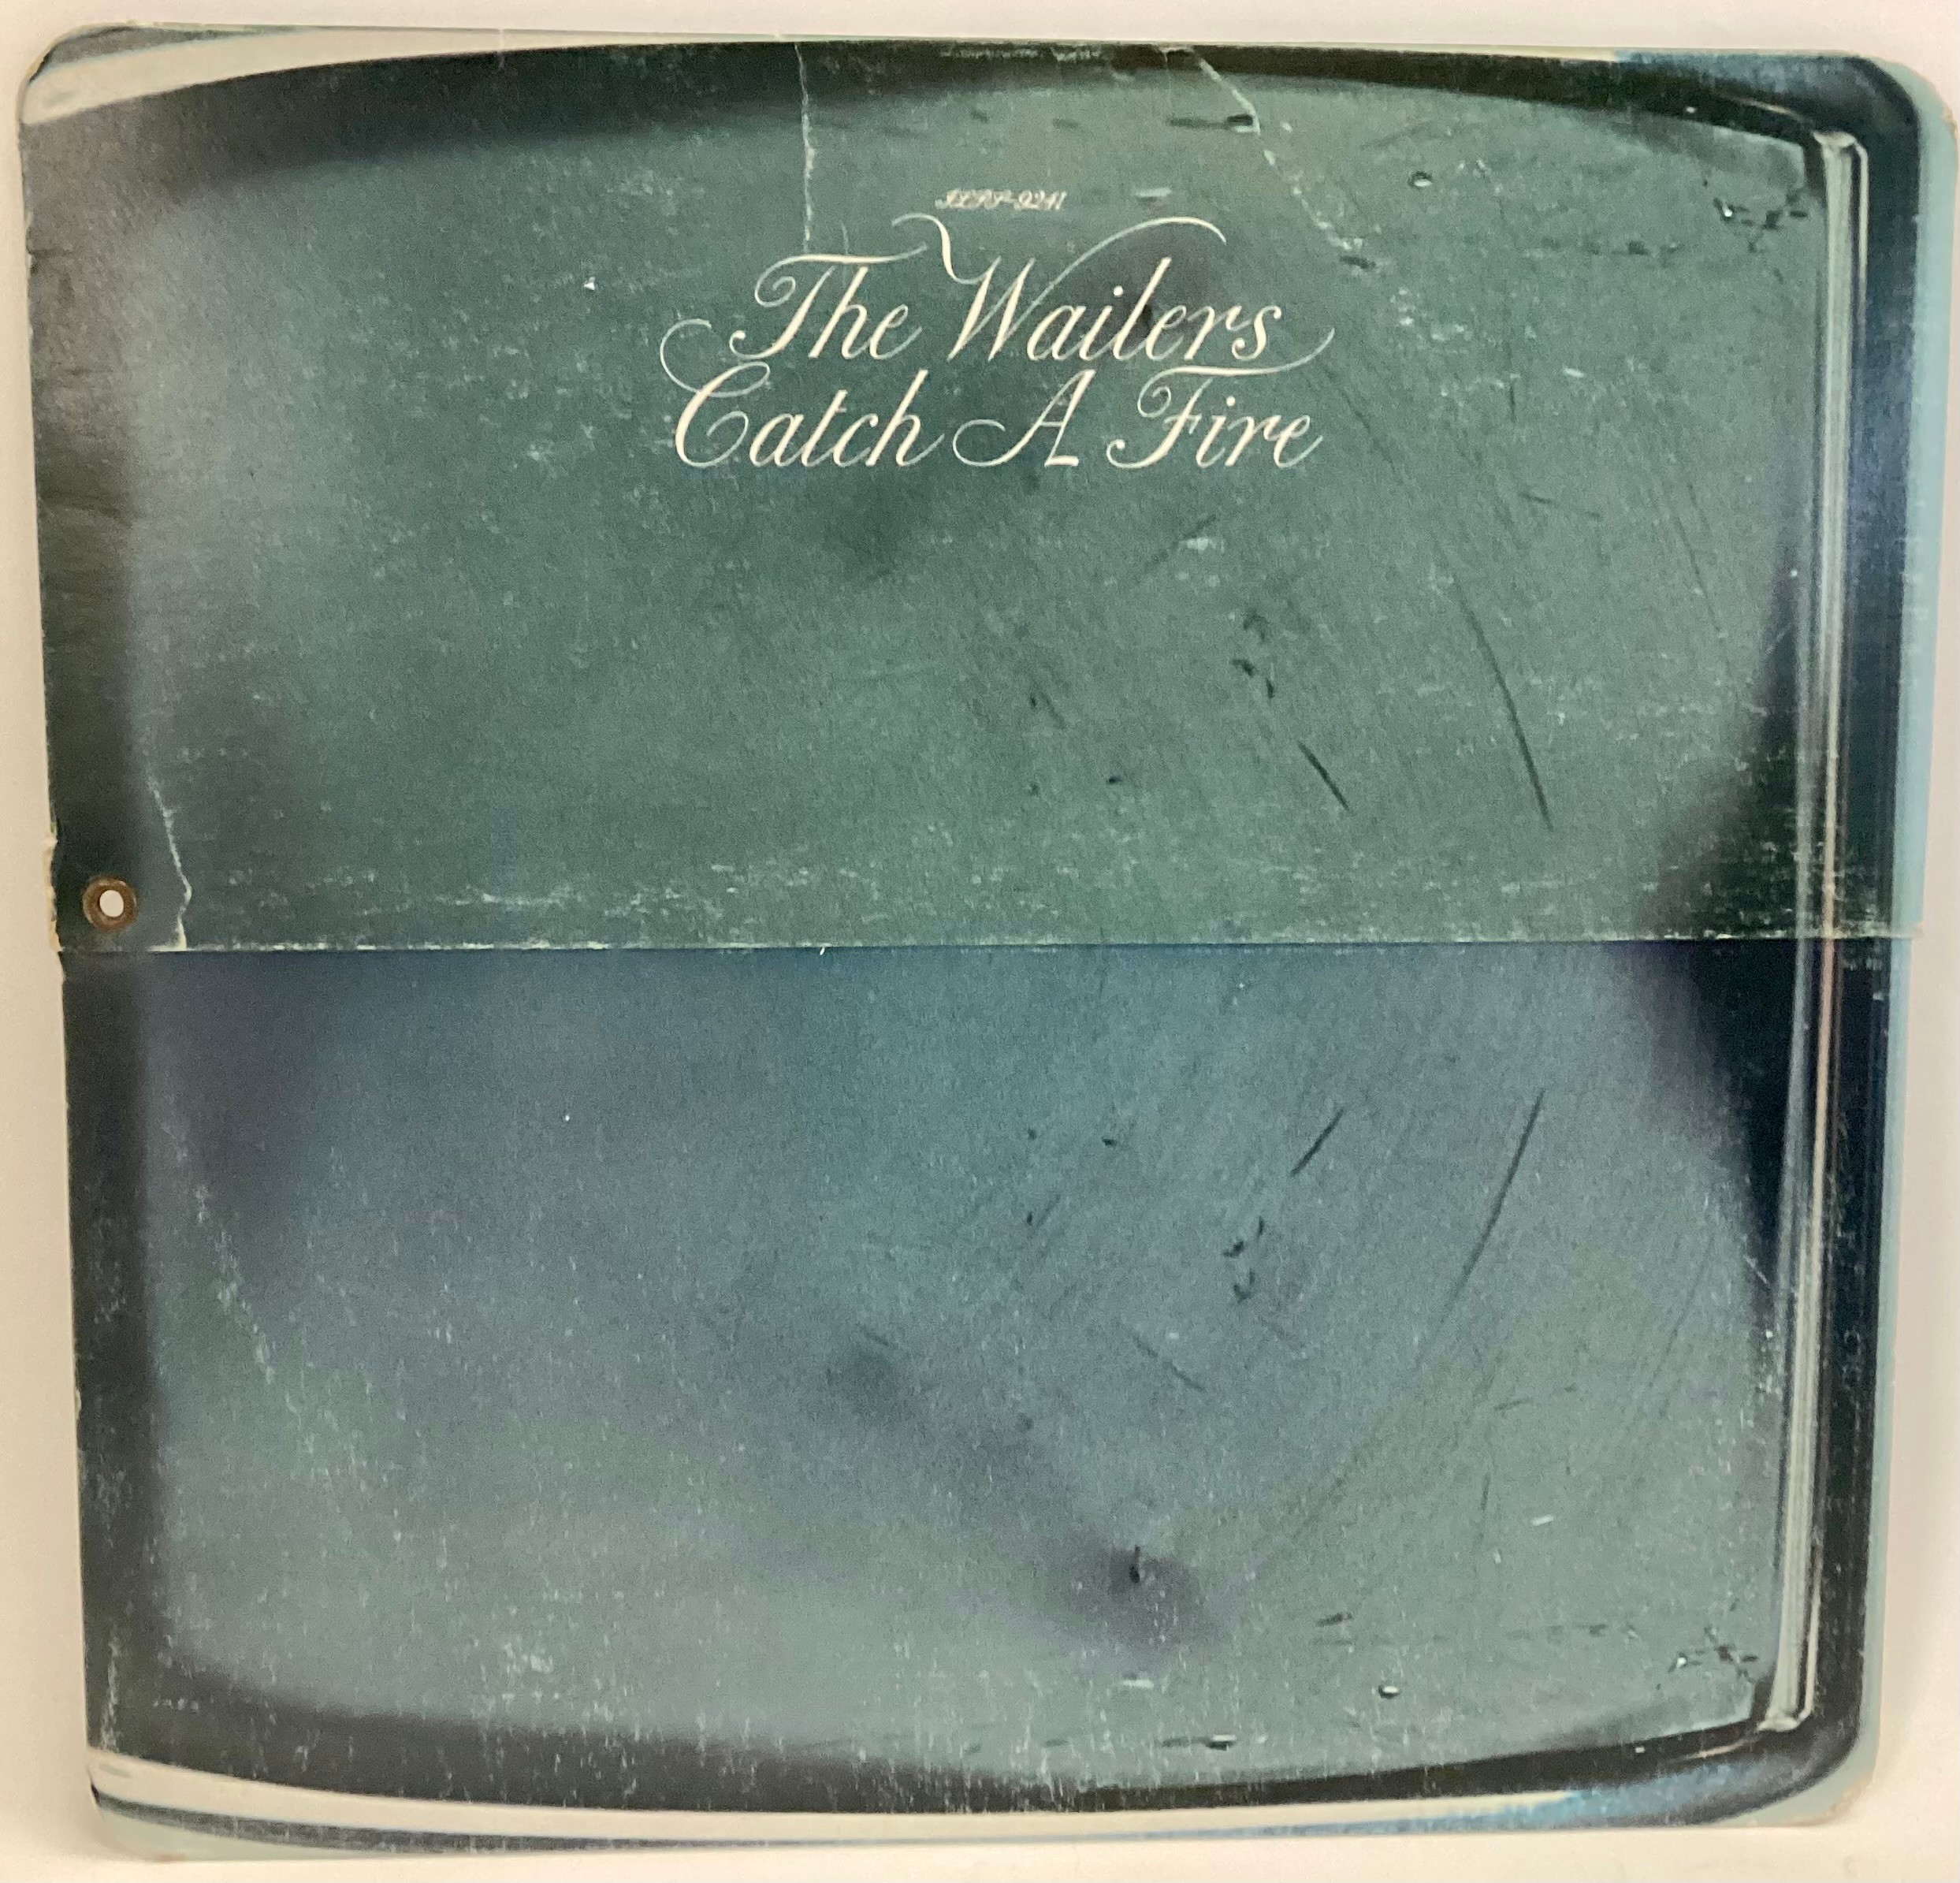 BOB MARLEY AND THE WAILERS LP ‘CATCH A FIRE’ IN RARE ZIPPO LIGHTER SLEEVE. From 1973 on Island